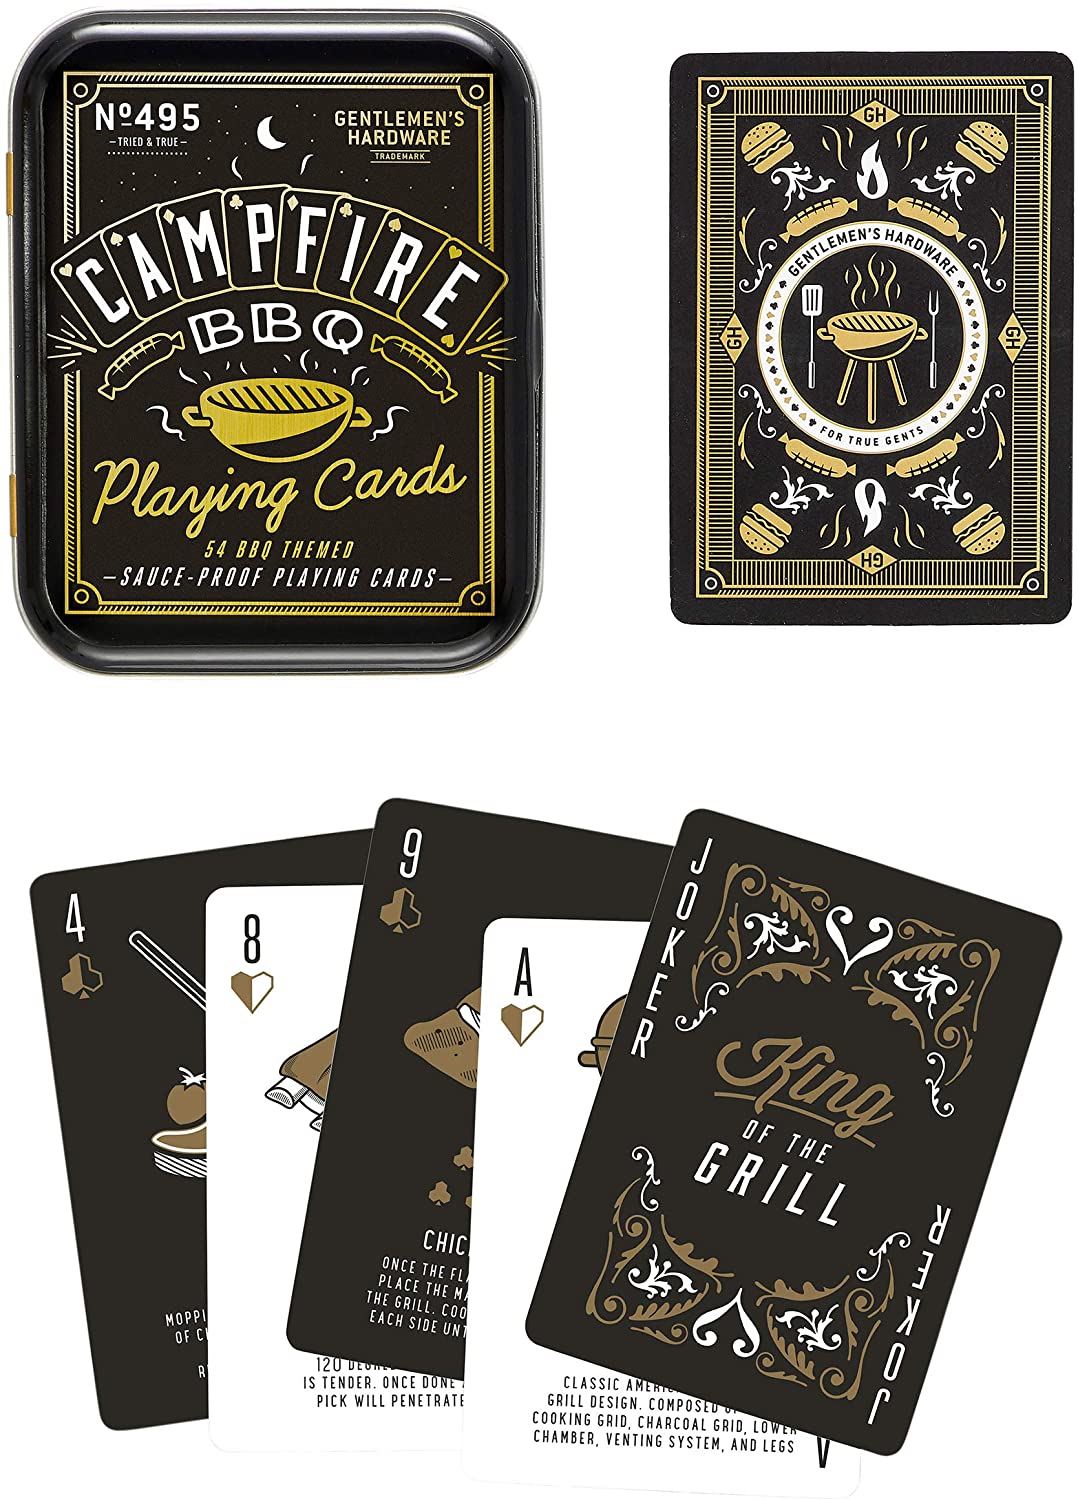 Gentlemen's Hardware Novelty Campfire BBQ Playing Cards